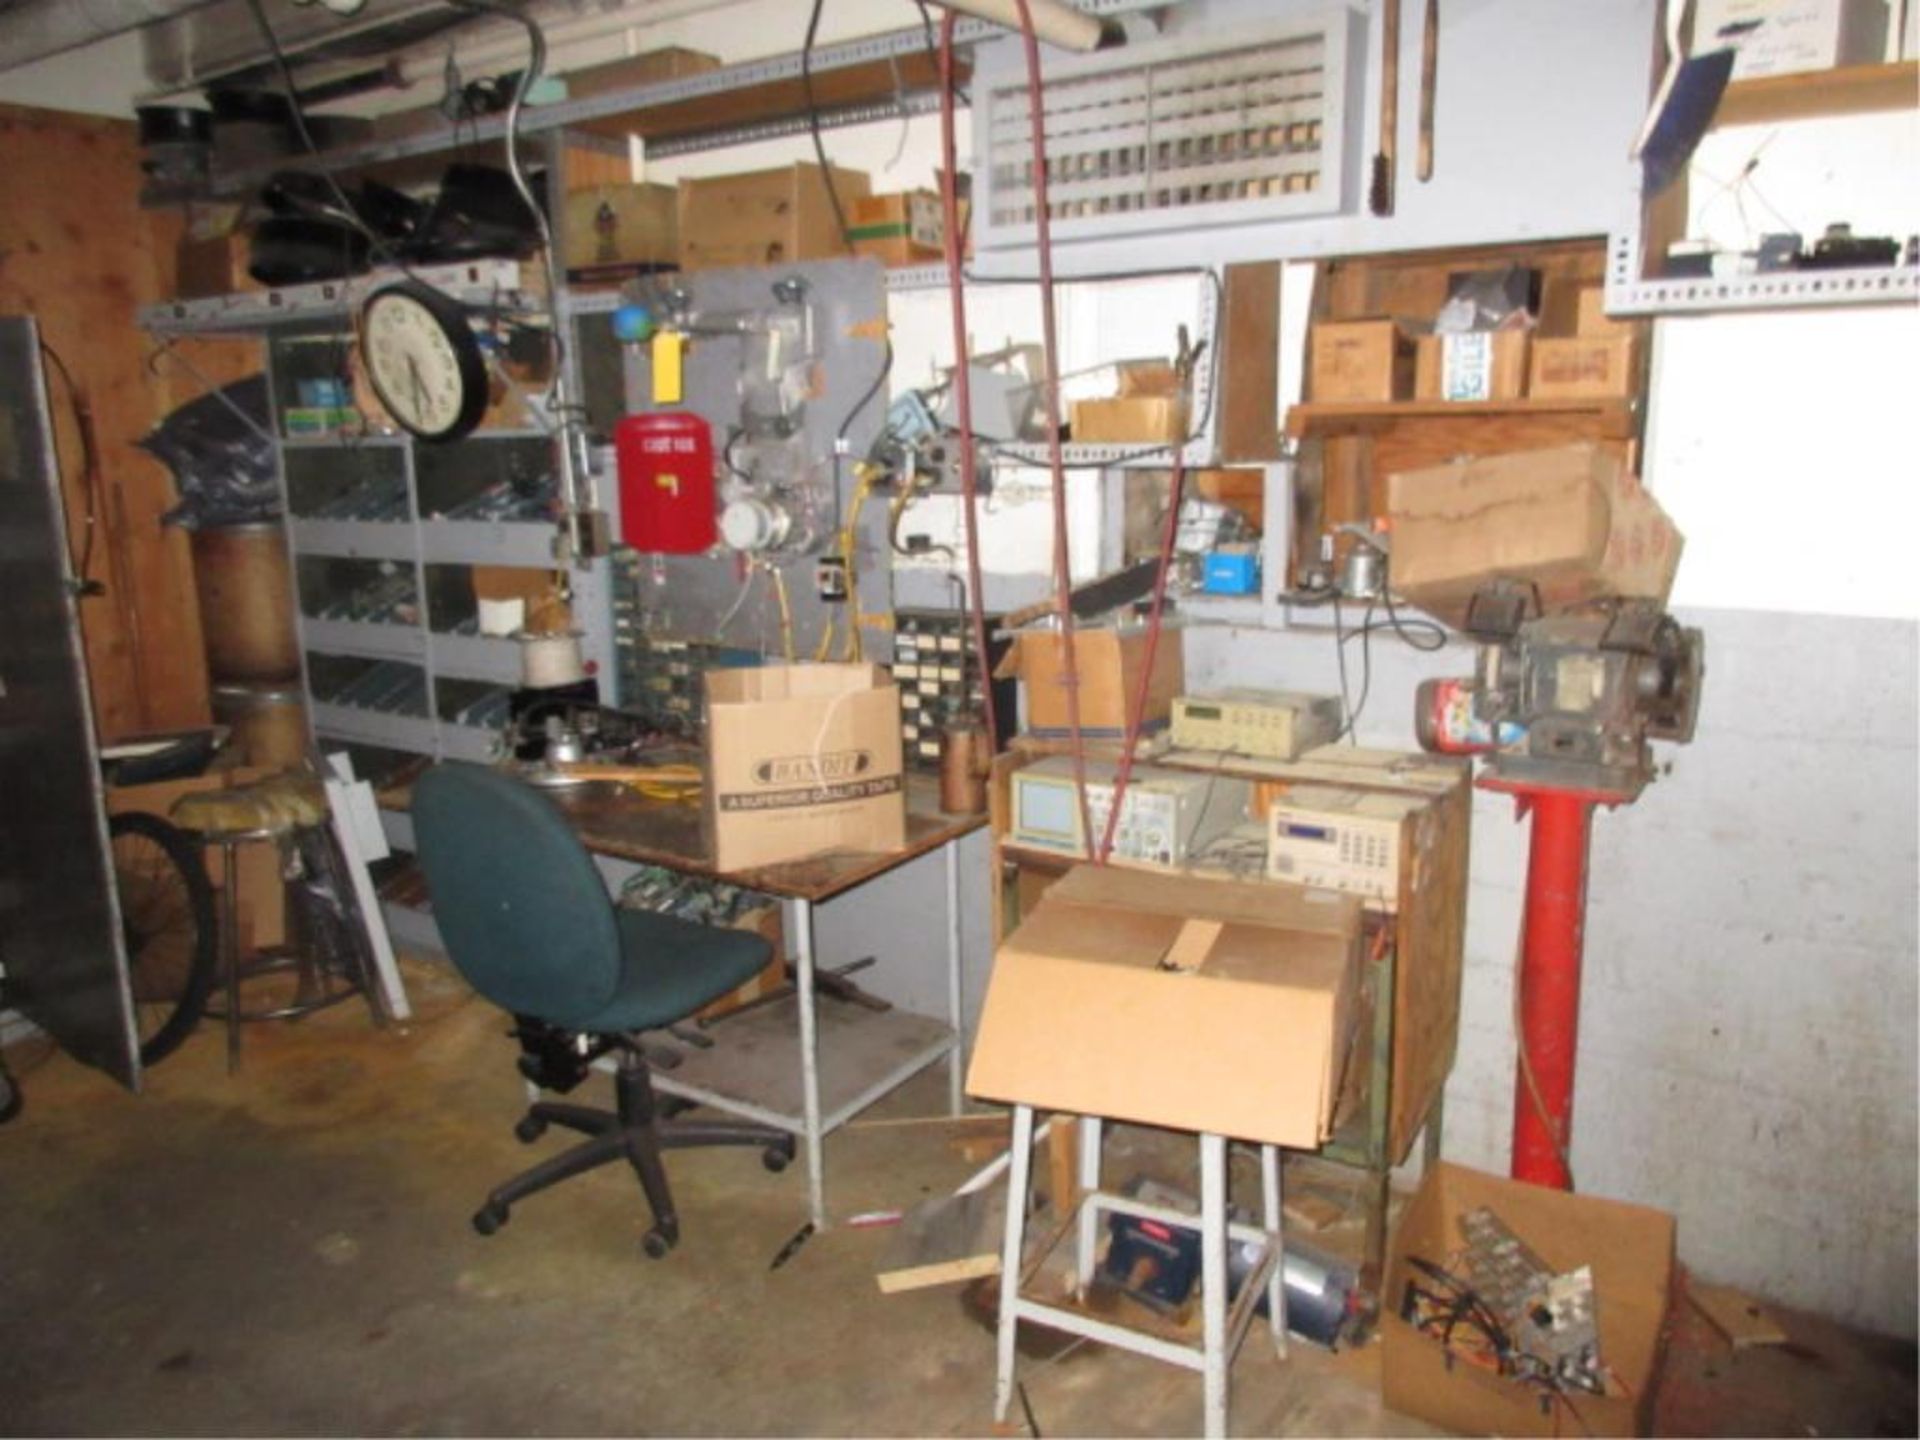 Lot Contents of Electrical Shop, includes cabinets, contents, conduit, etc. in three rooms. - Image 12 of 17